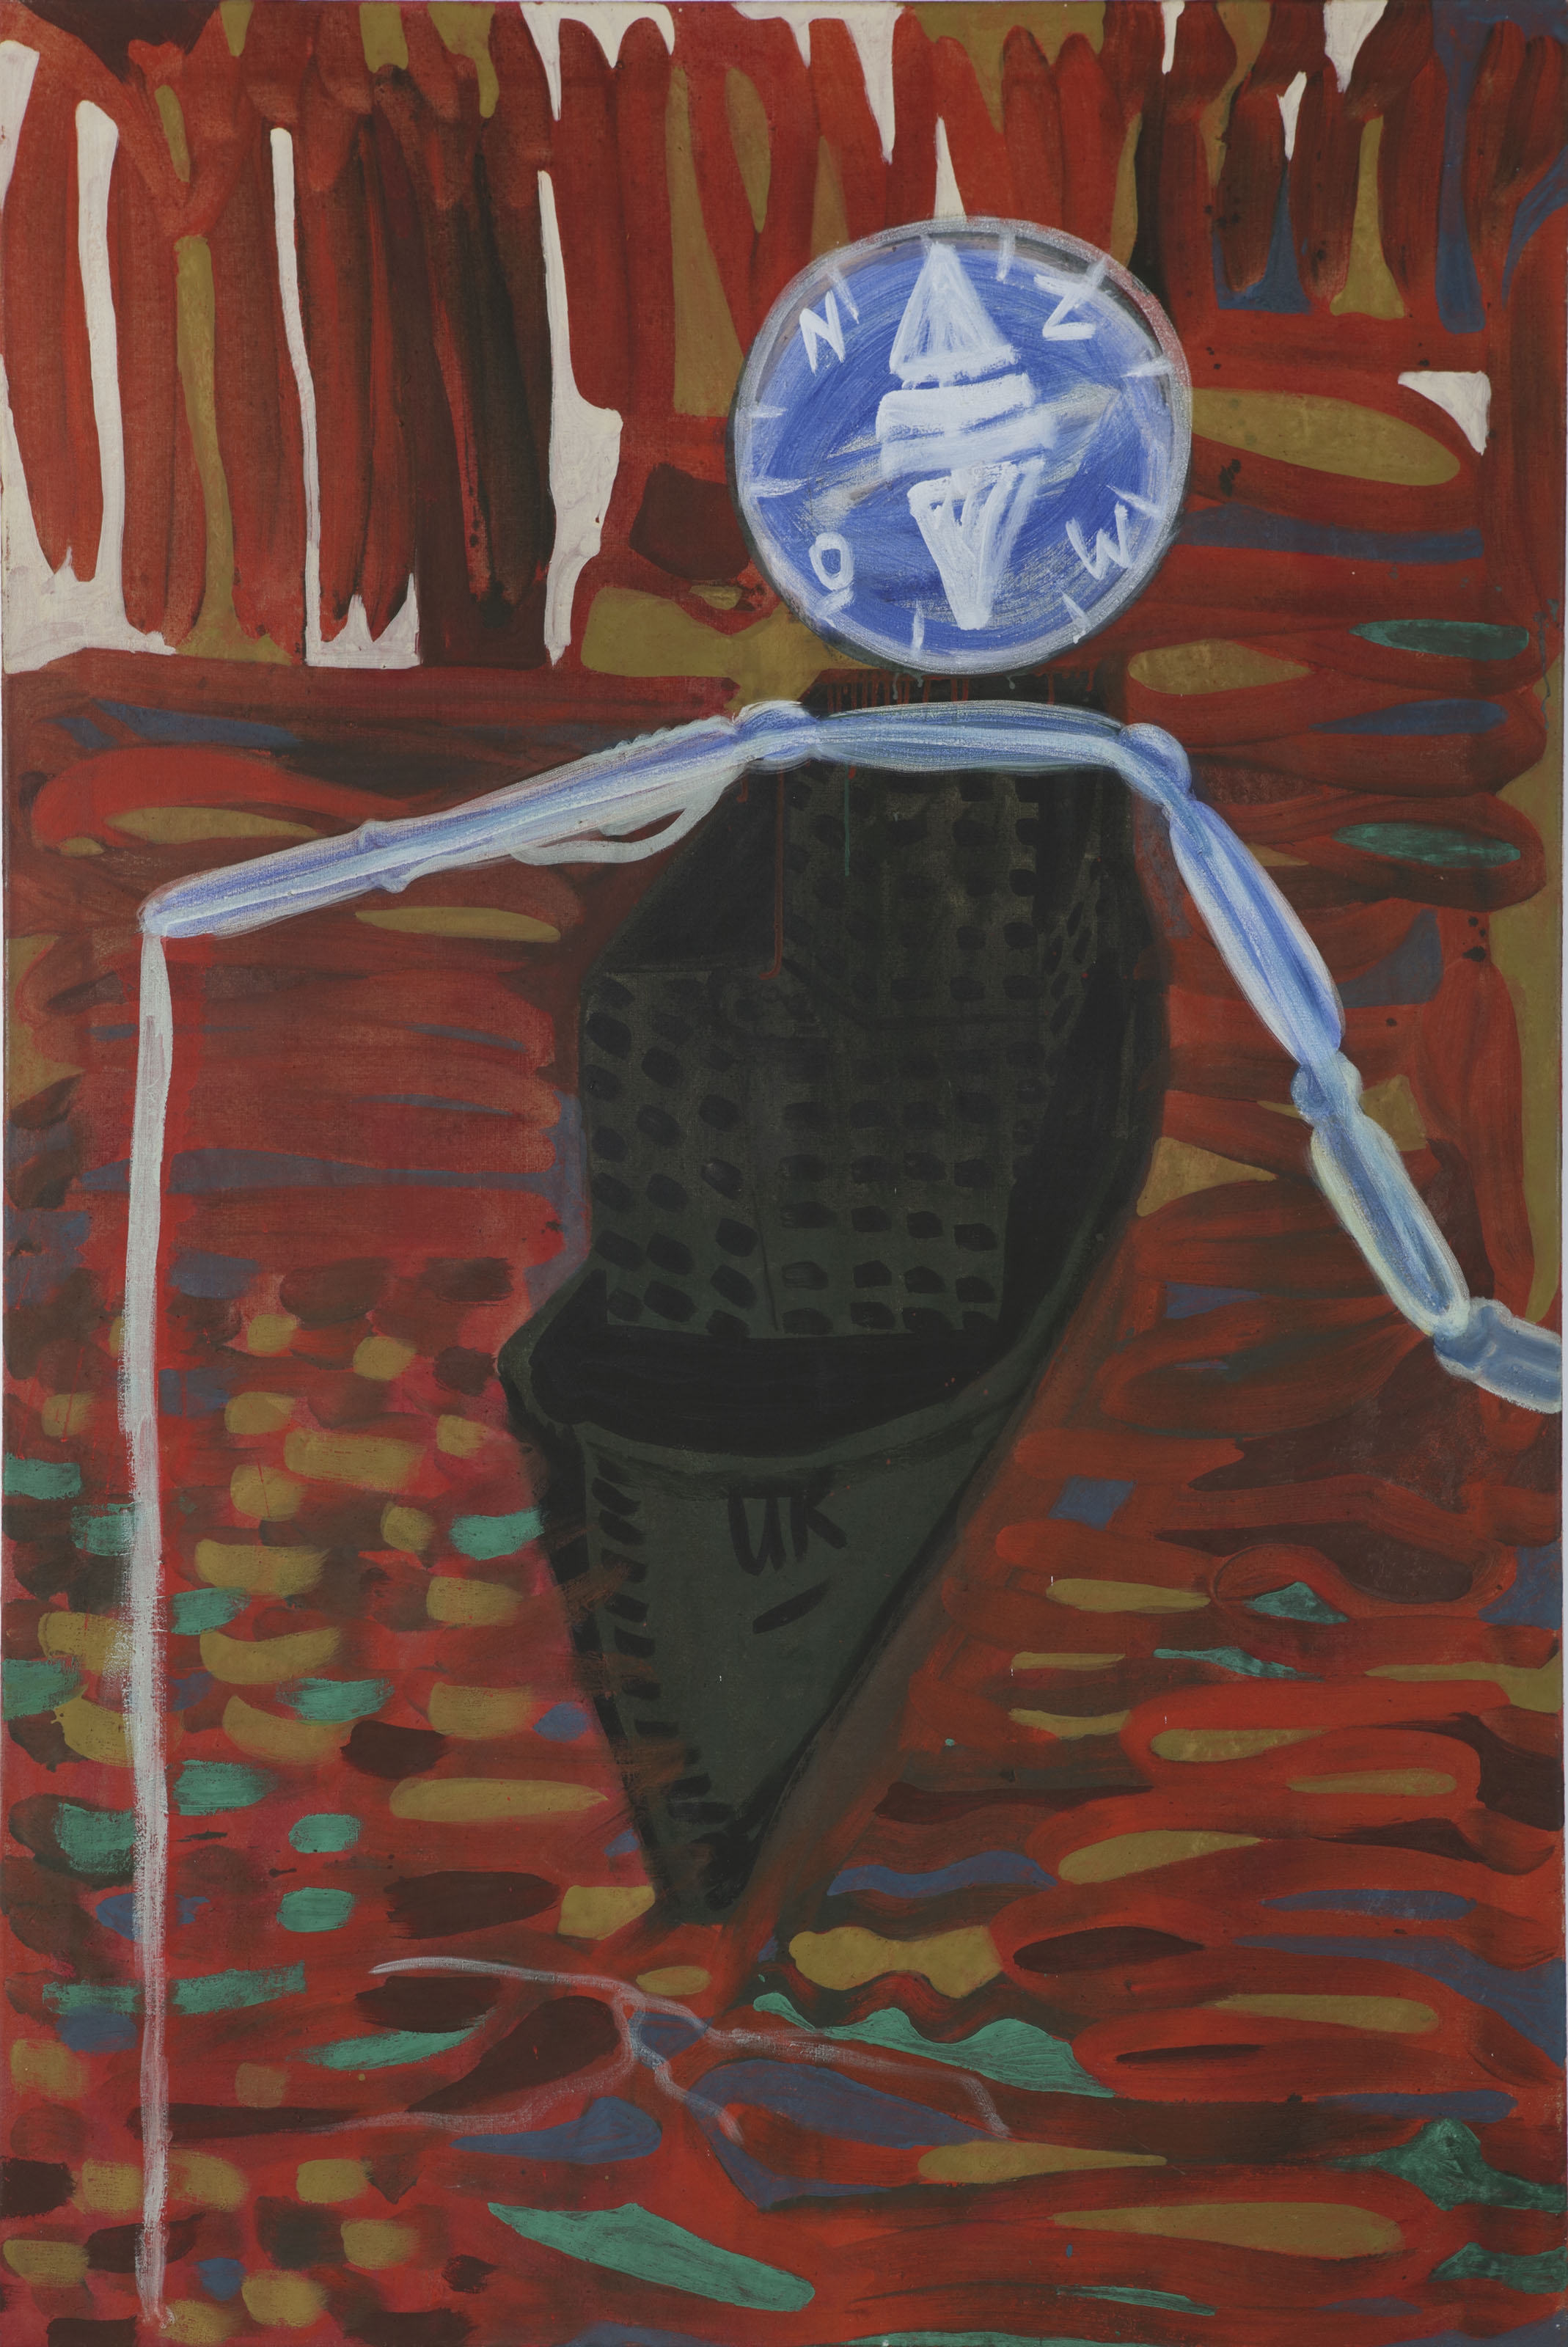 Untitled by Rob Birza, Painted in 1991